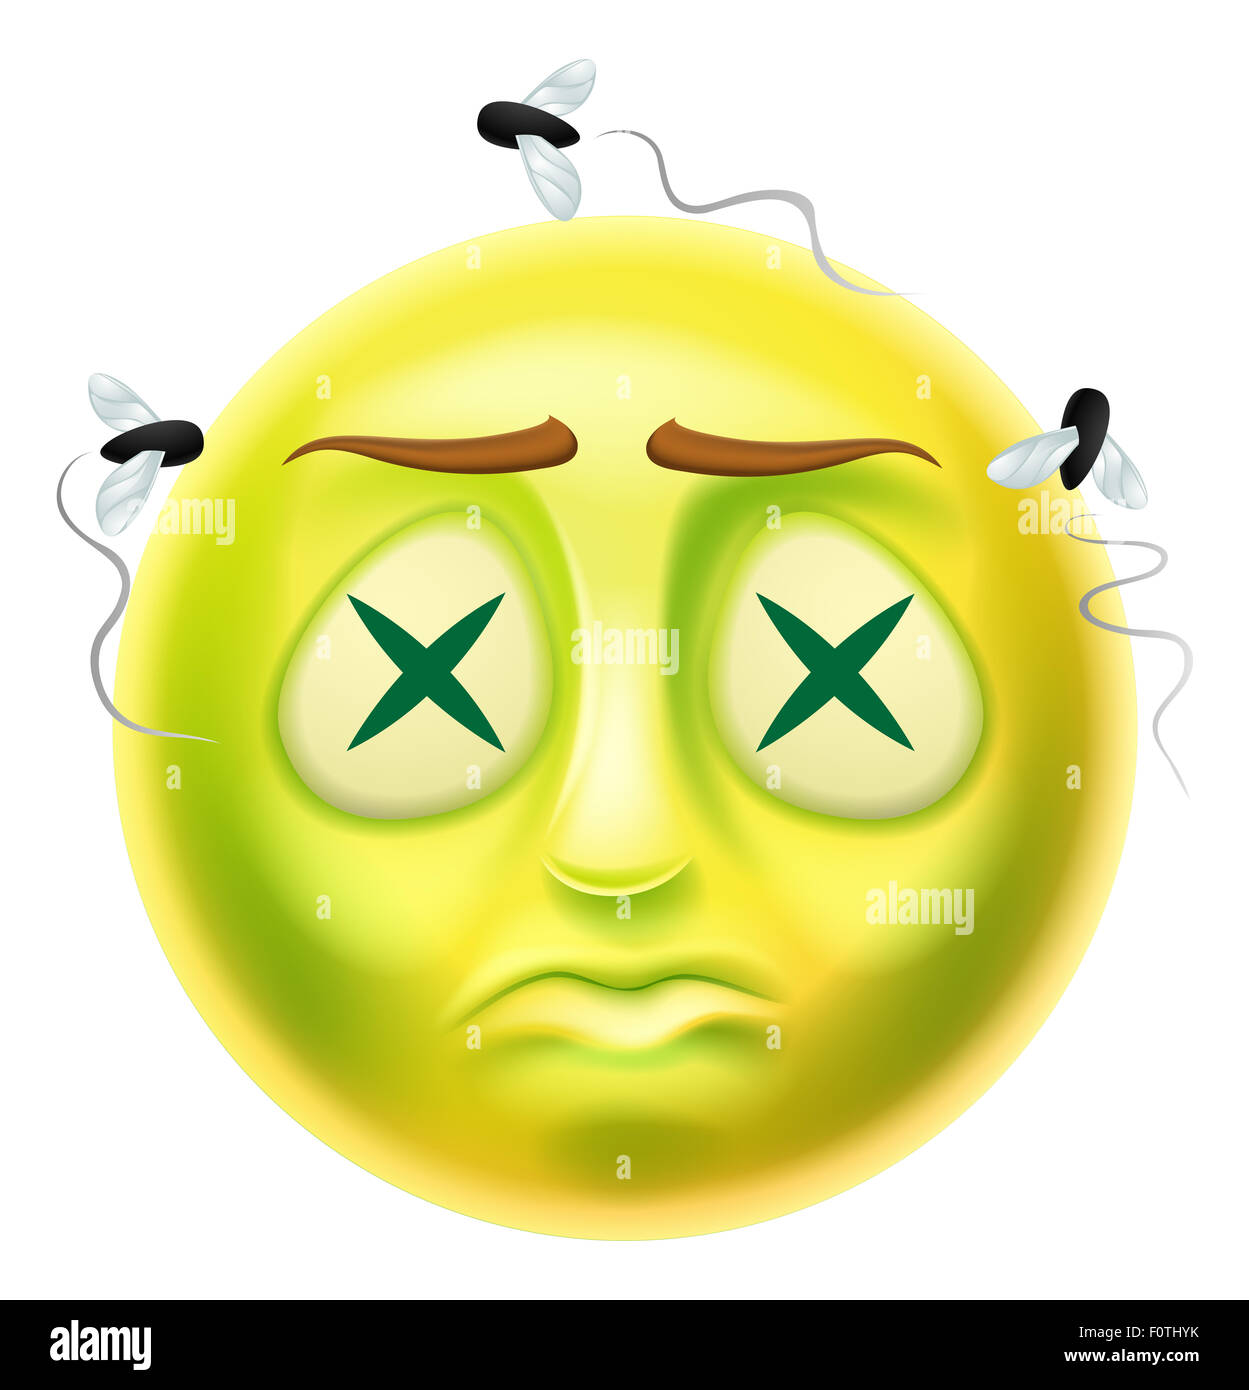 A zombie dead emoticon emoji character with xs in his eyes and flies flying around him Stock Photo